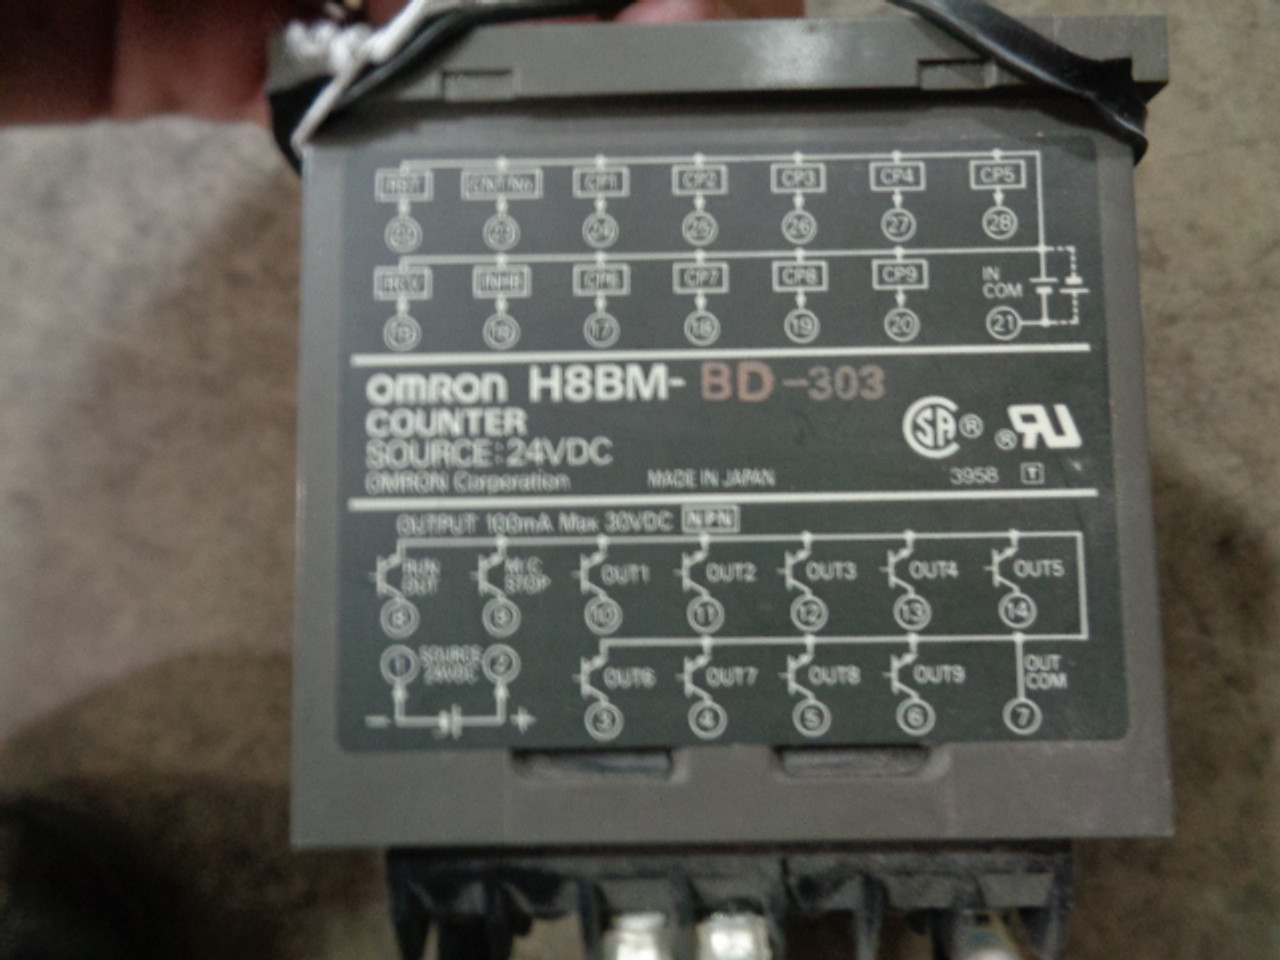 Omron H8BM-BD-303 Maintenance Counter Missing Front Panel1